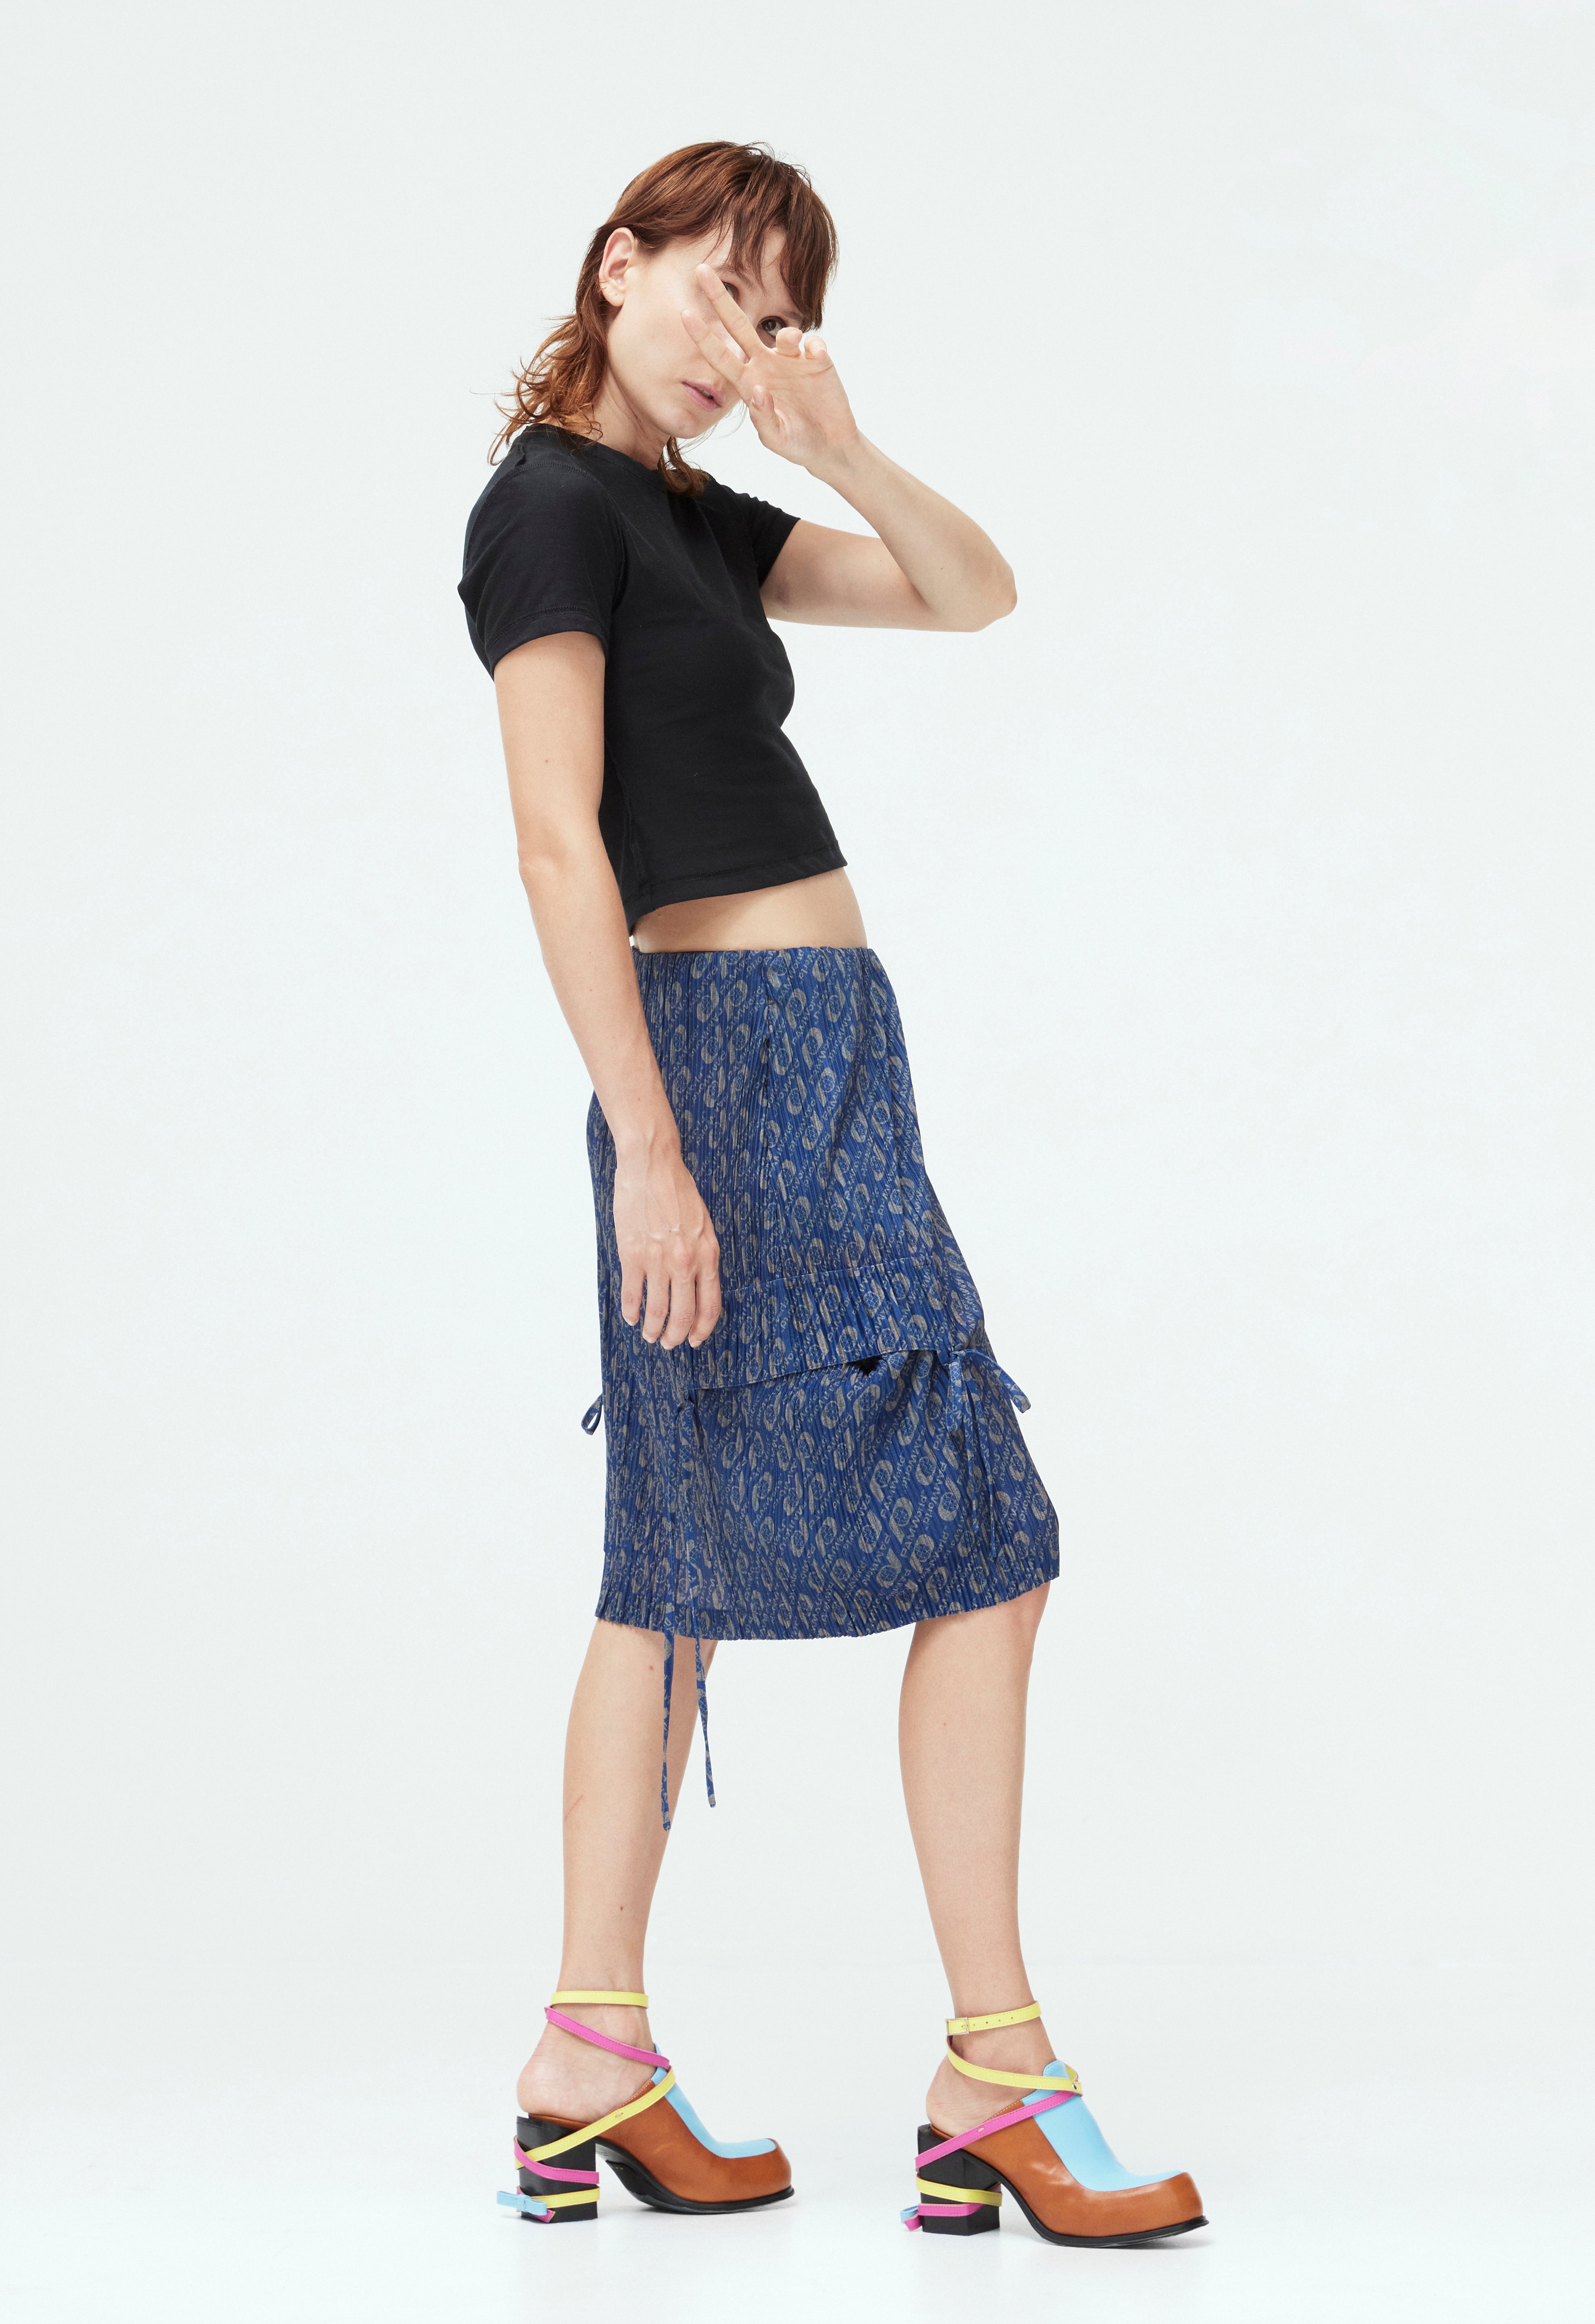 The MONOGRAM PLEATED SKIRT  available online with global shipping, and in PAM Stores Melbourne and Sydney.